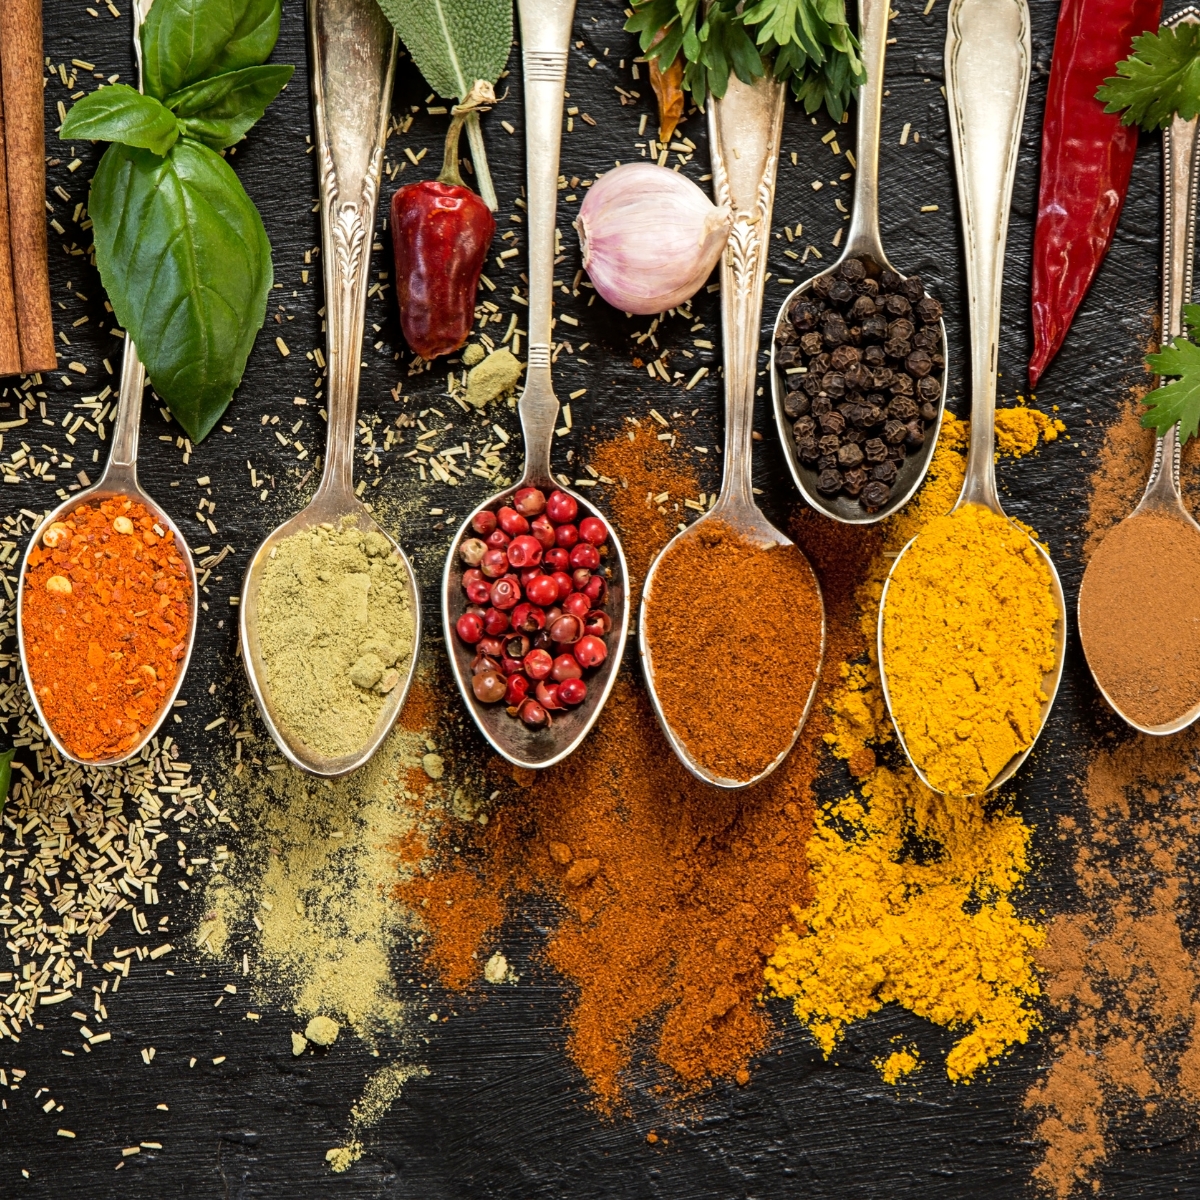 Experiment with spices and herbs